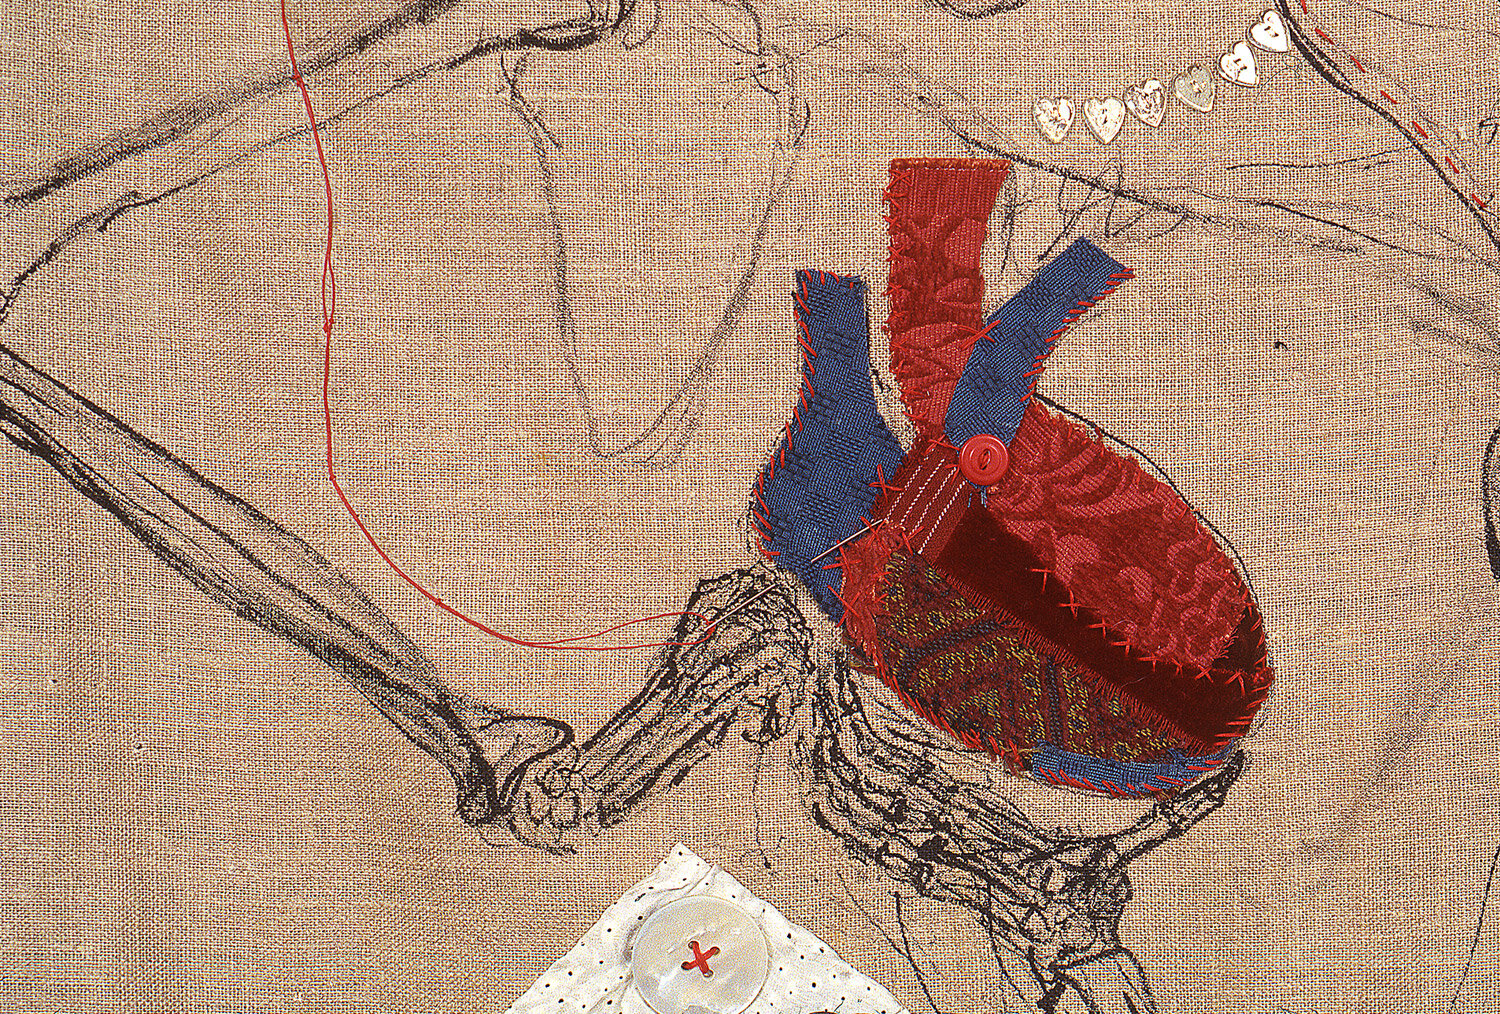 Hold On to Your Heart (detail)